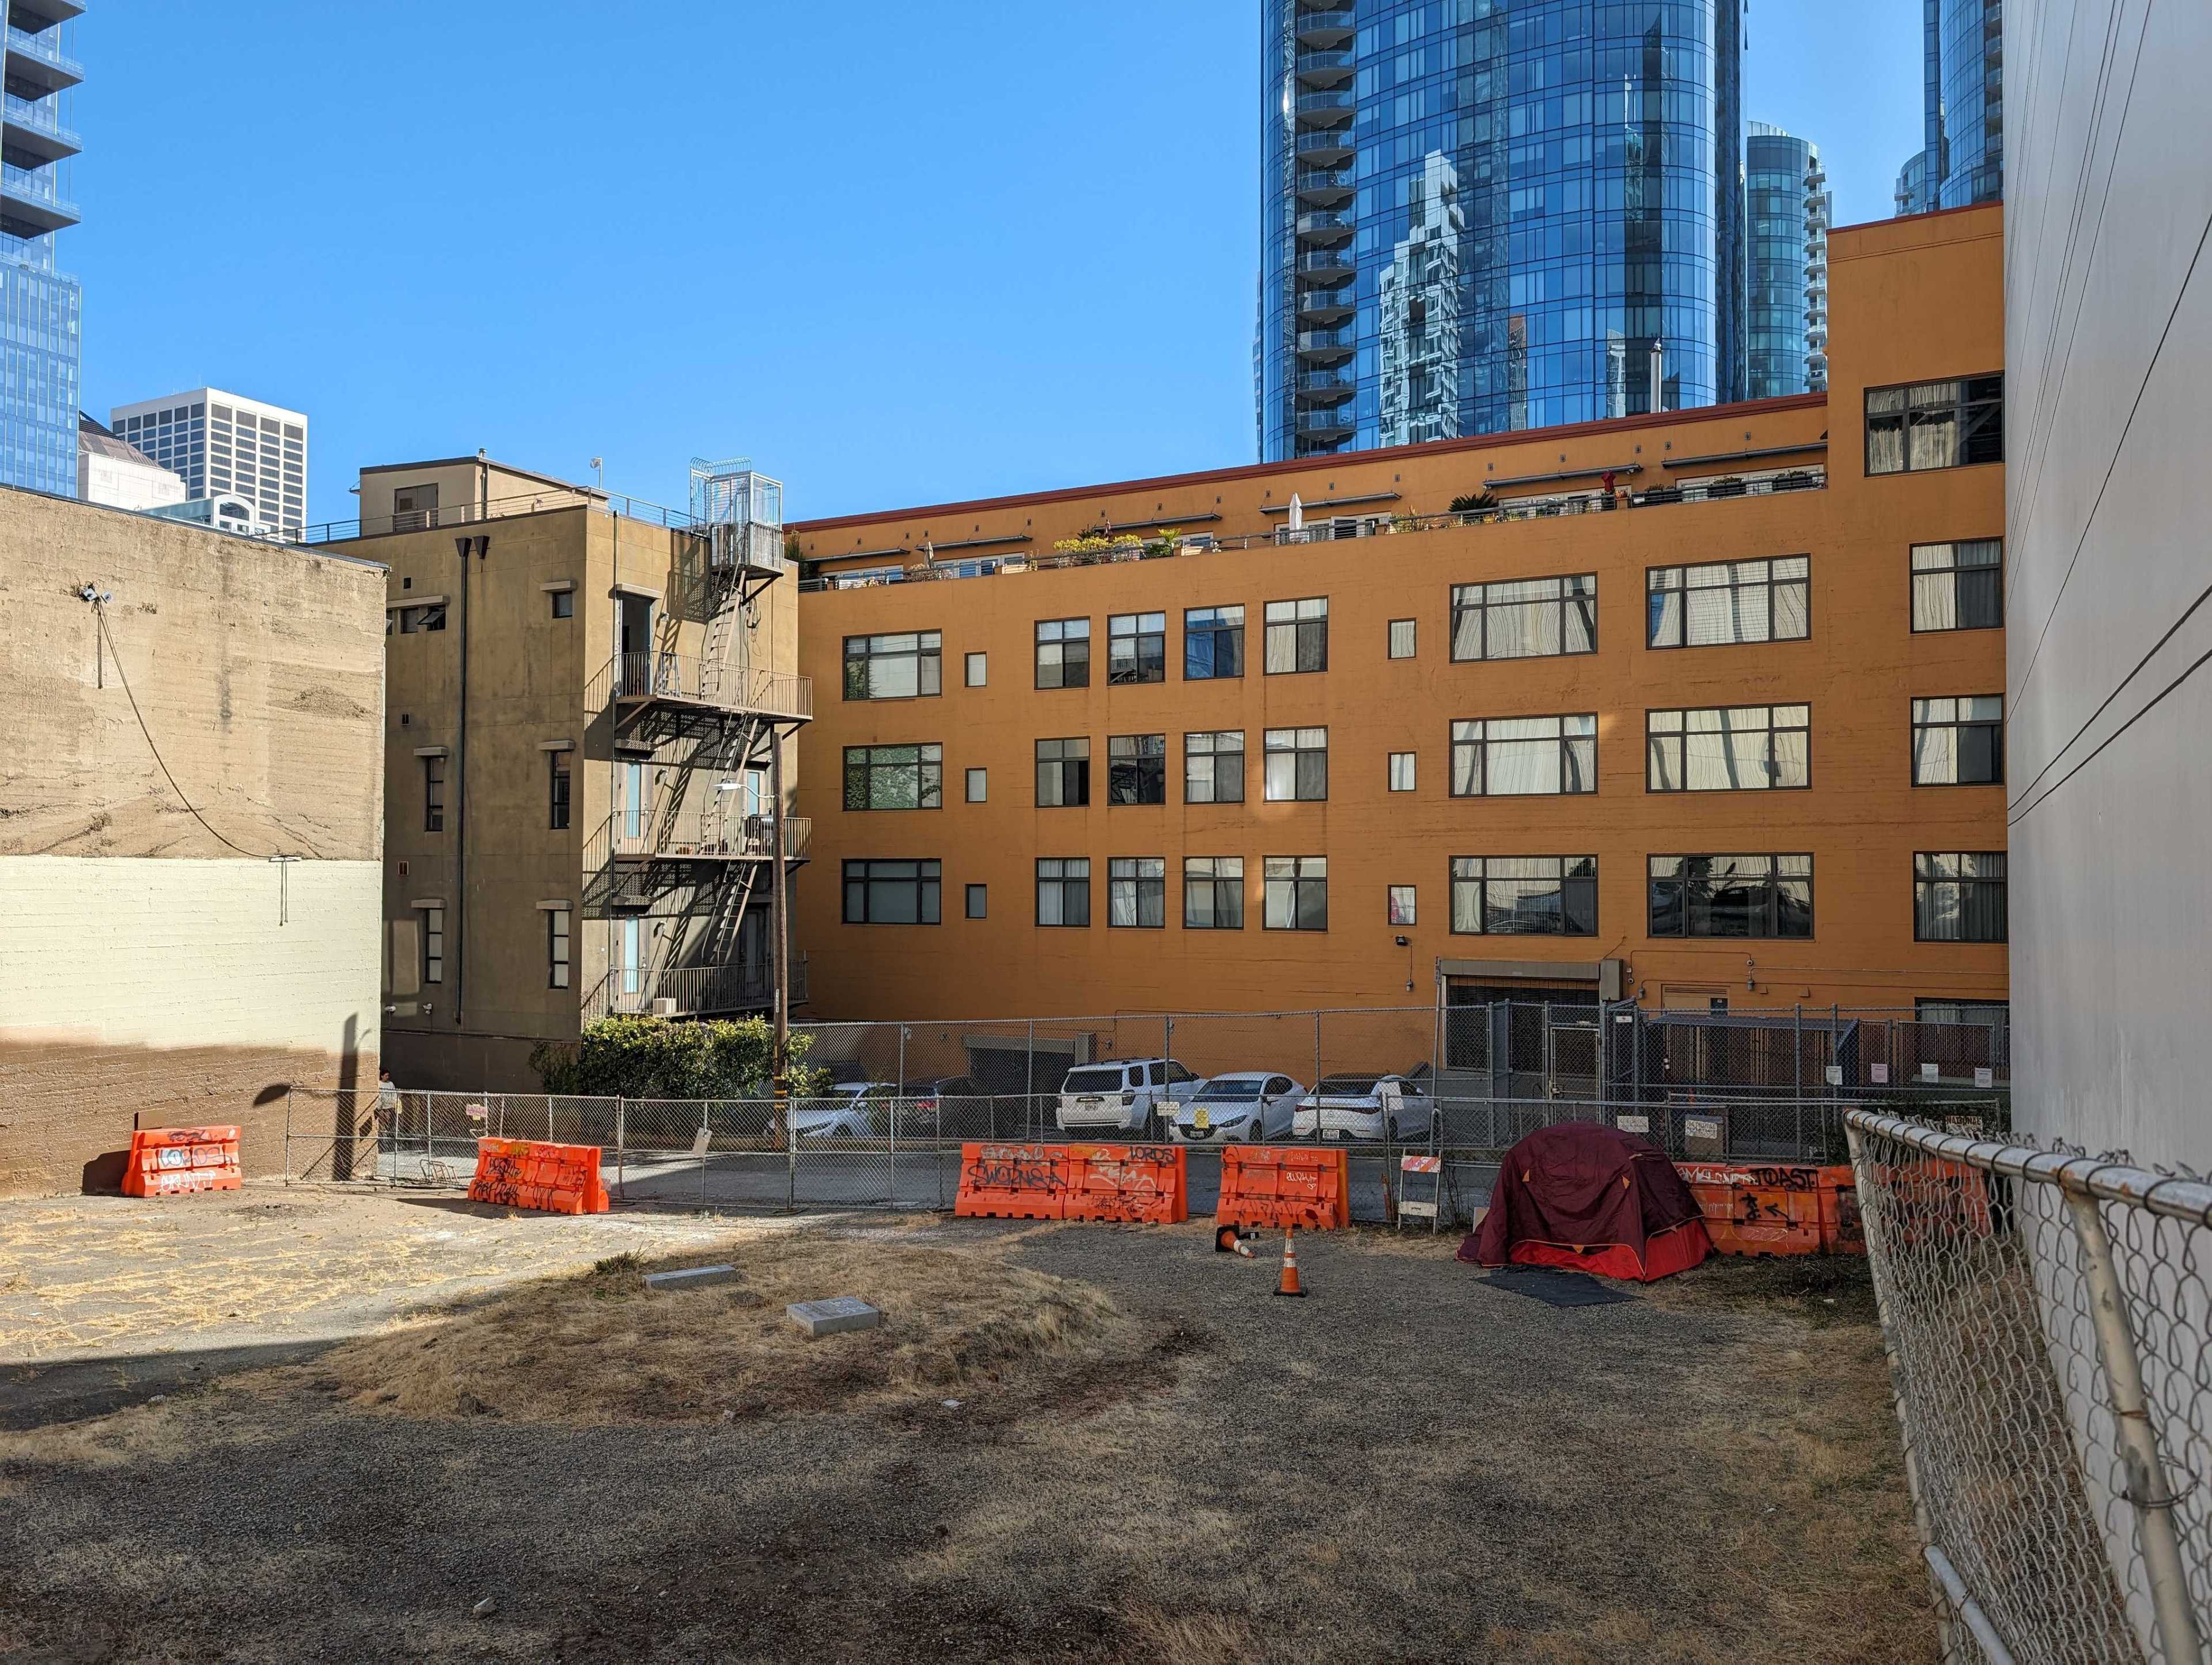 The image shows a vacant, fenced lot surrounded by tall buildings, including a beige and orange building. Safety barriers and a makeshift tent are visible.